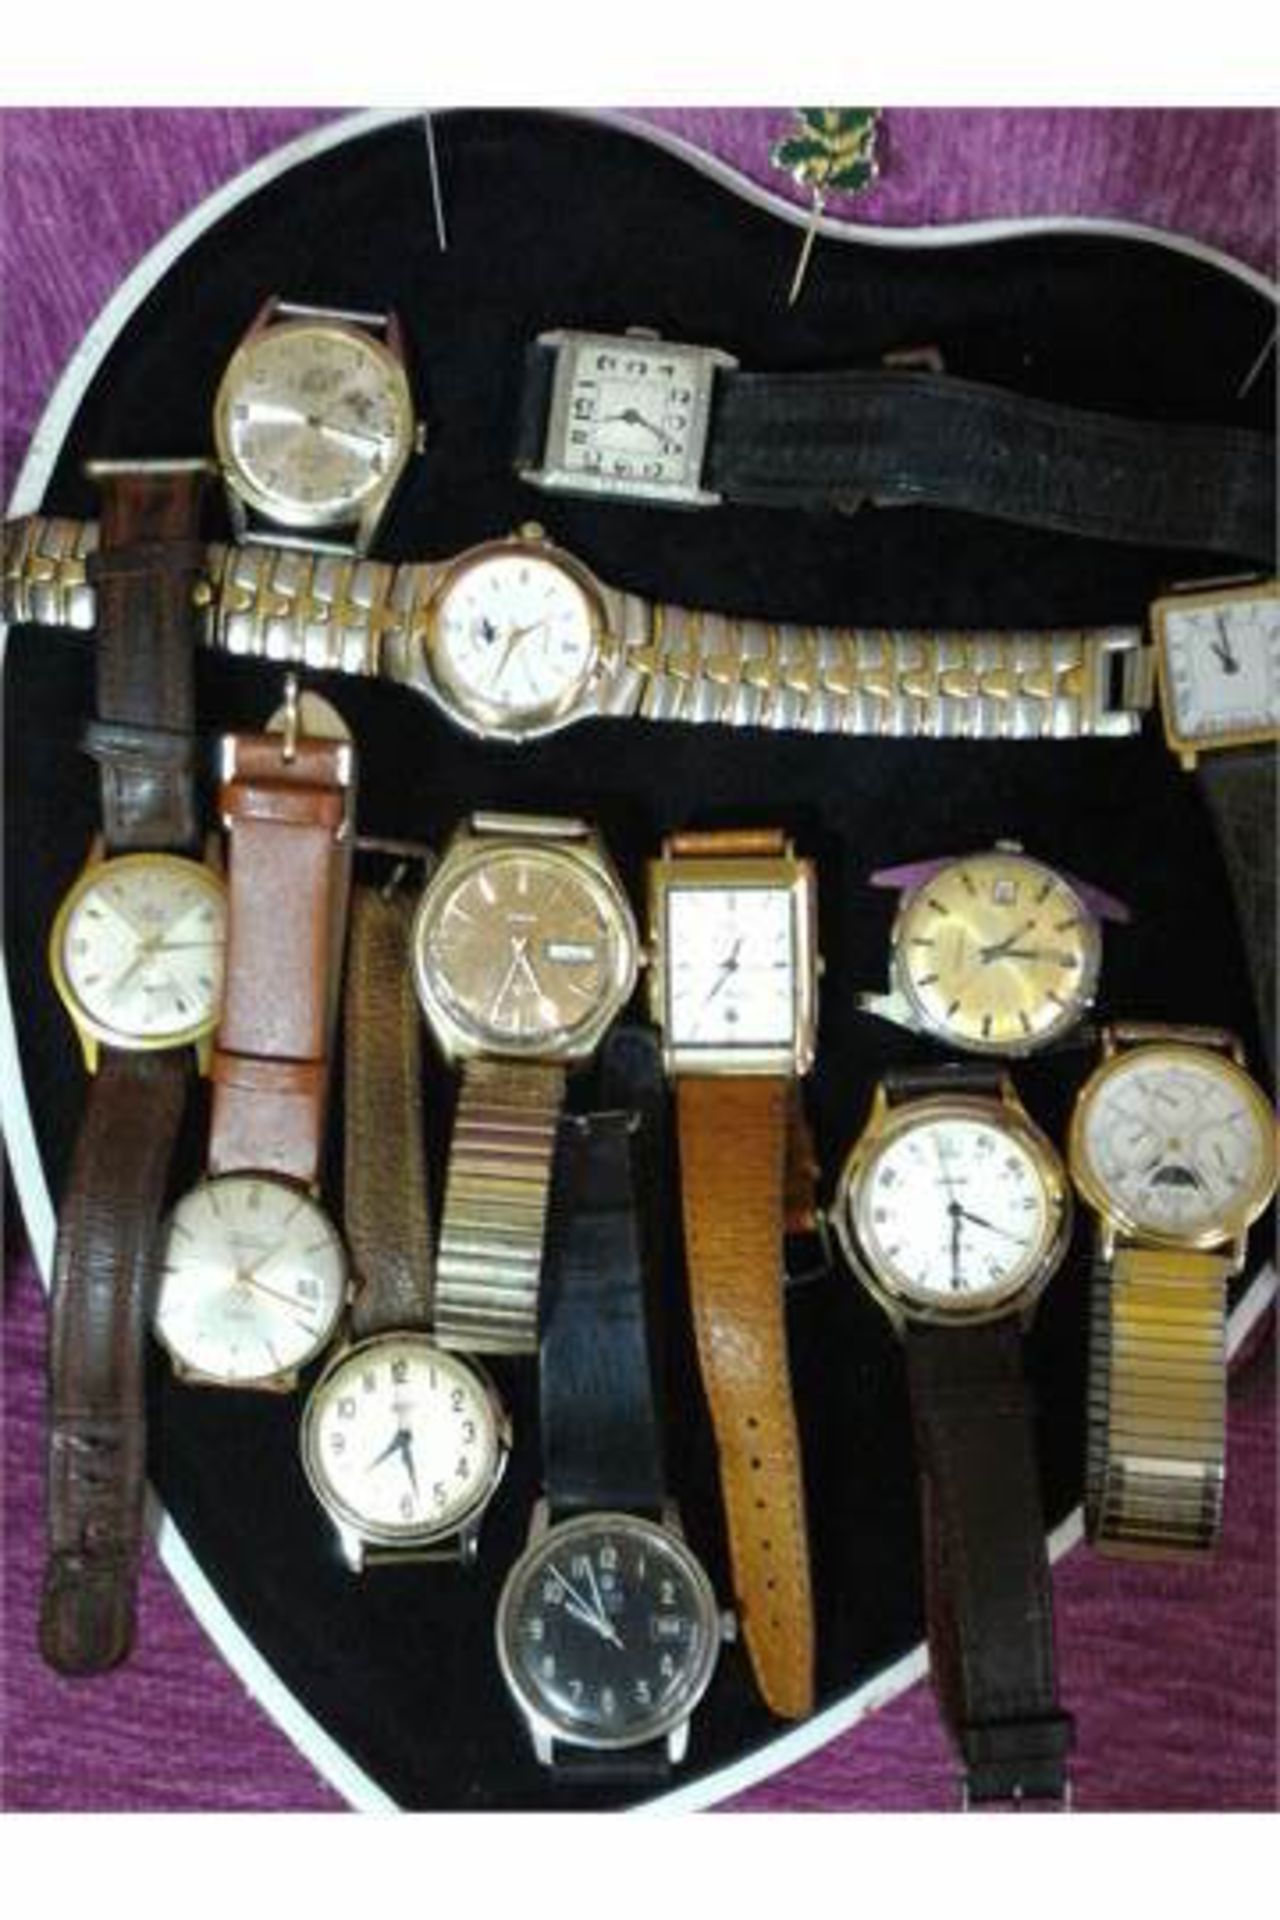 A collection of vintage gentlemens watches